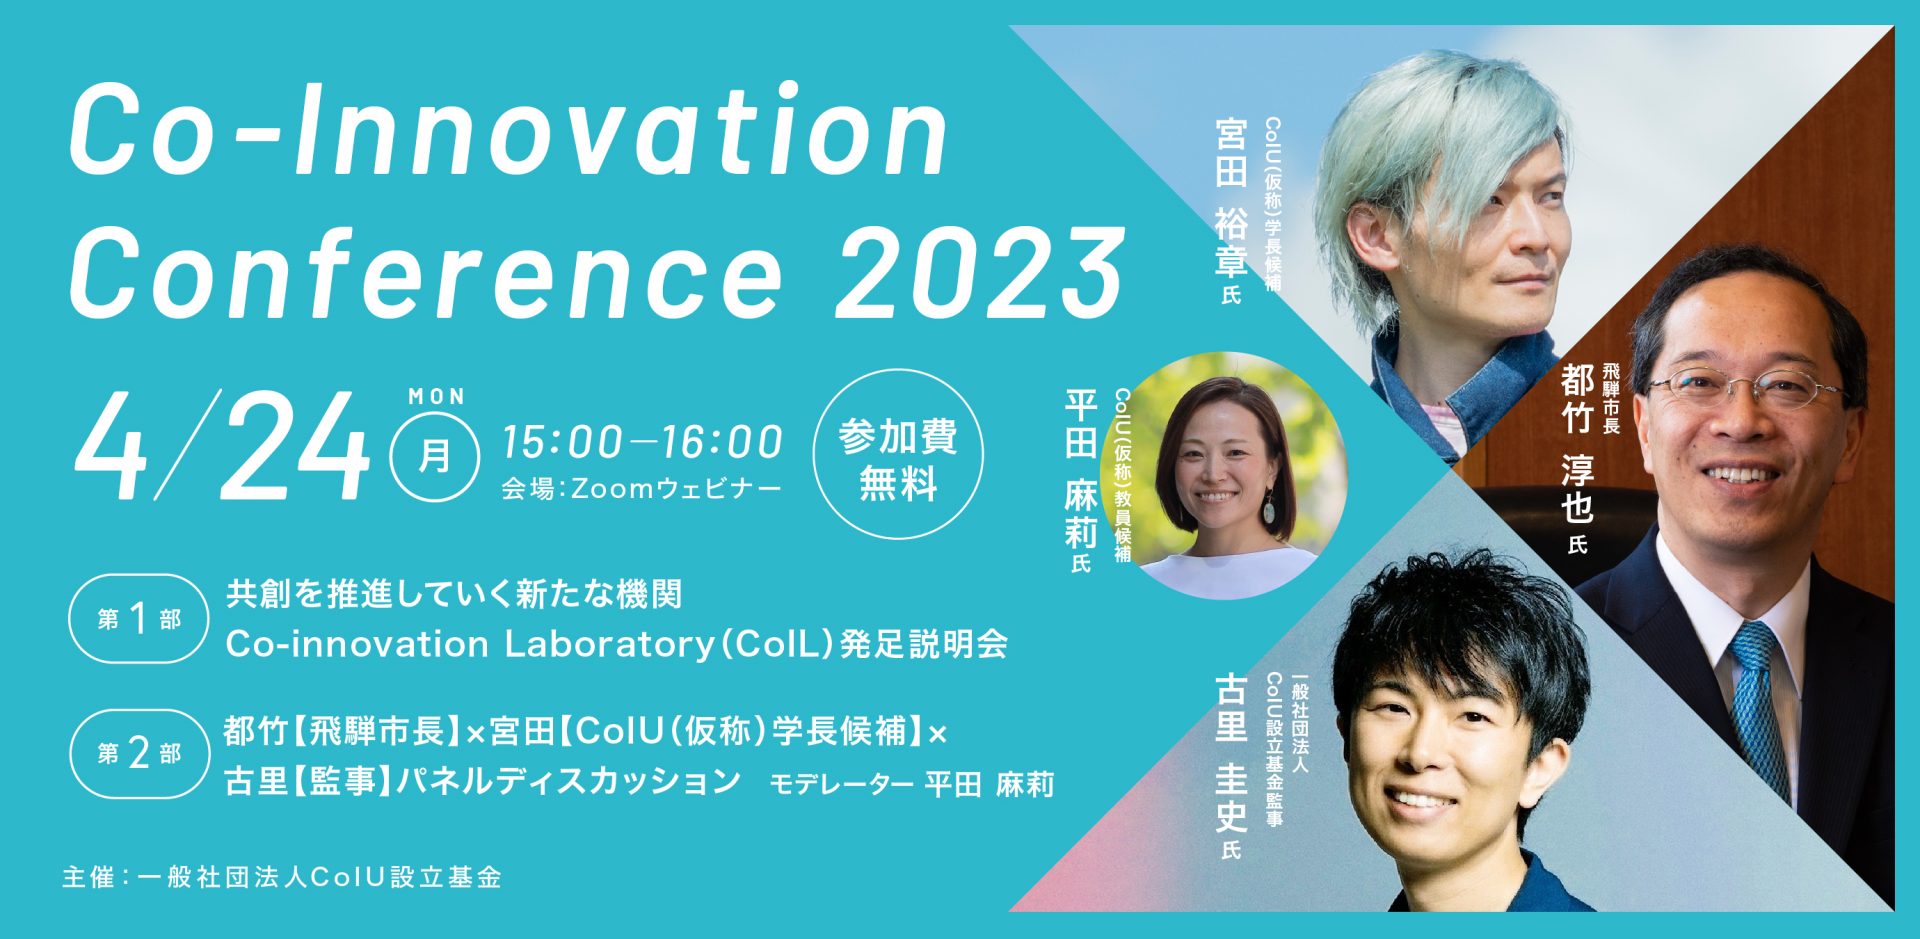 【4/24】Co-Innovation Conference 2023